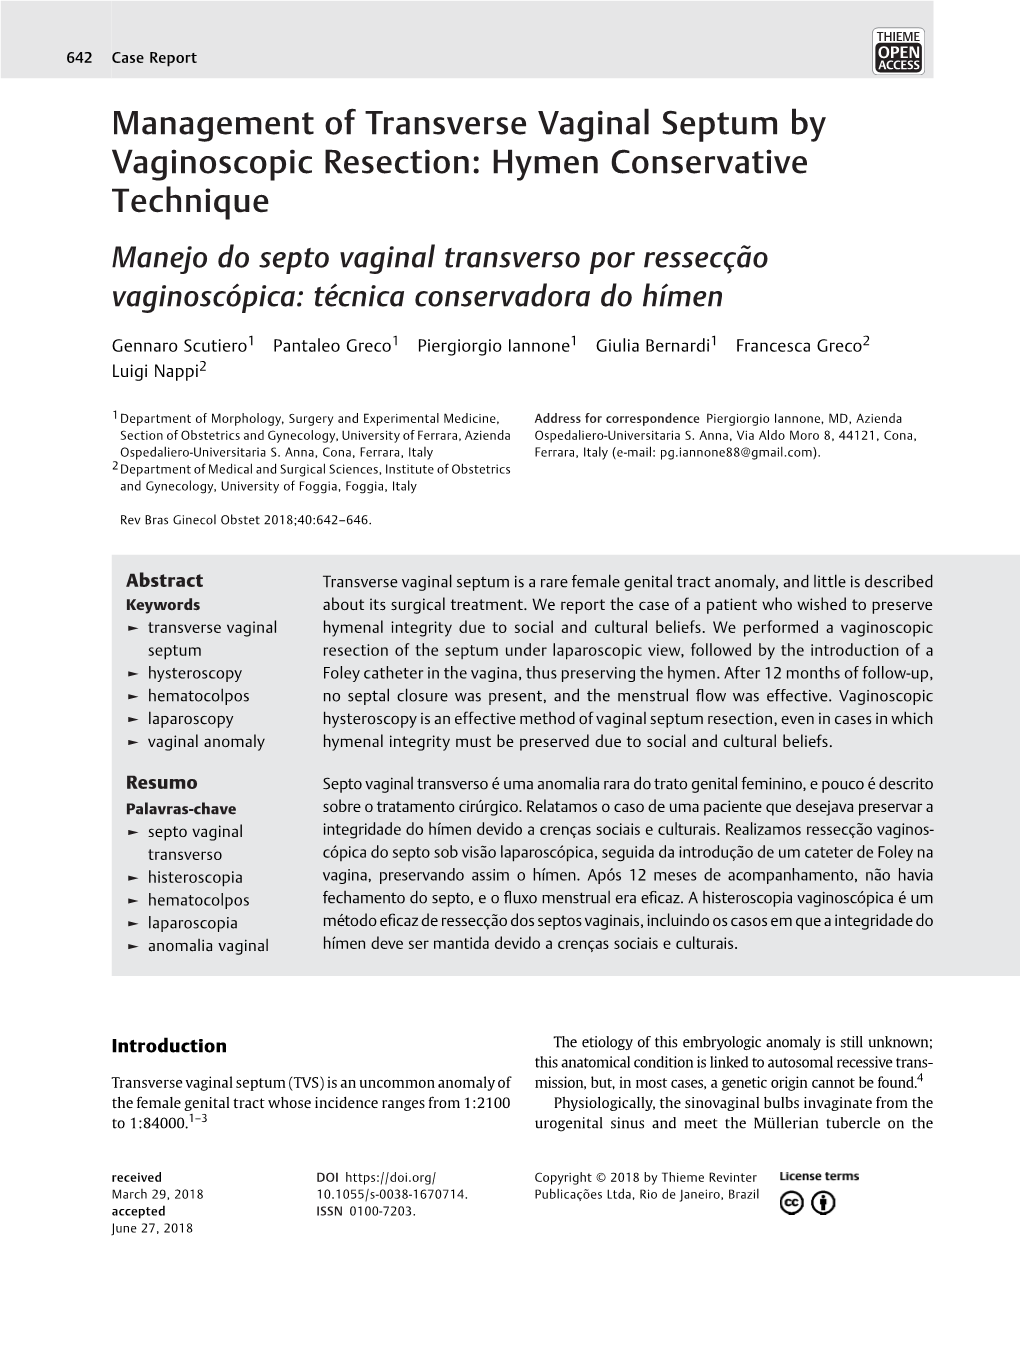 Management of Transverse Vaginal Septum by Vaginoscopic Resection